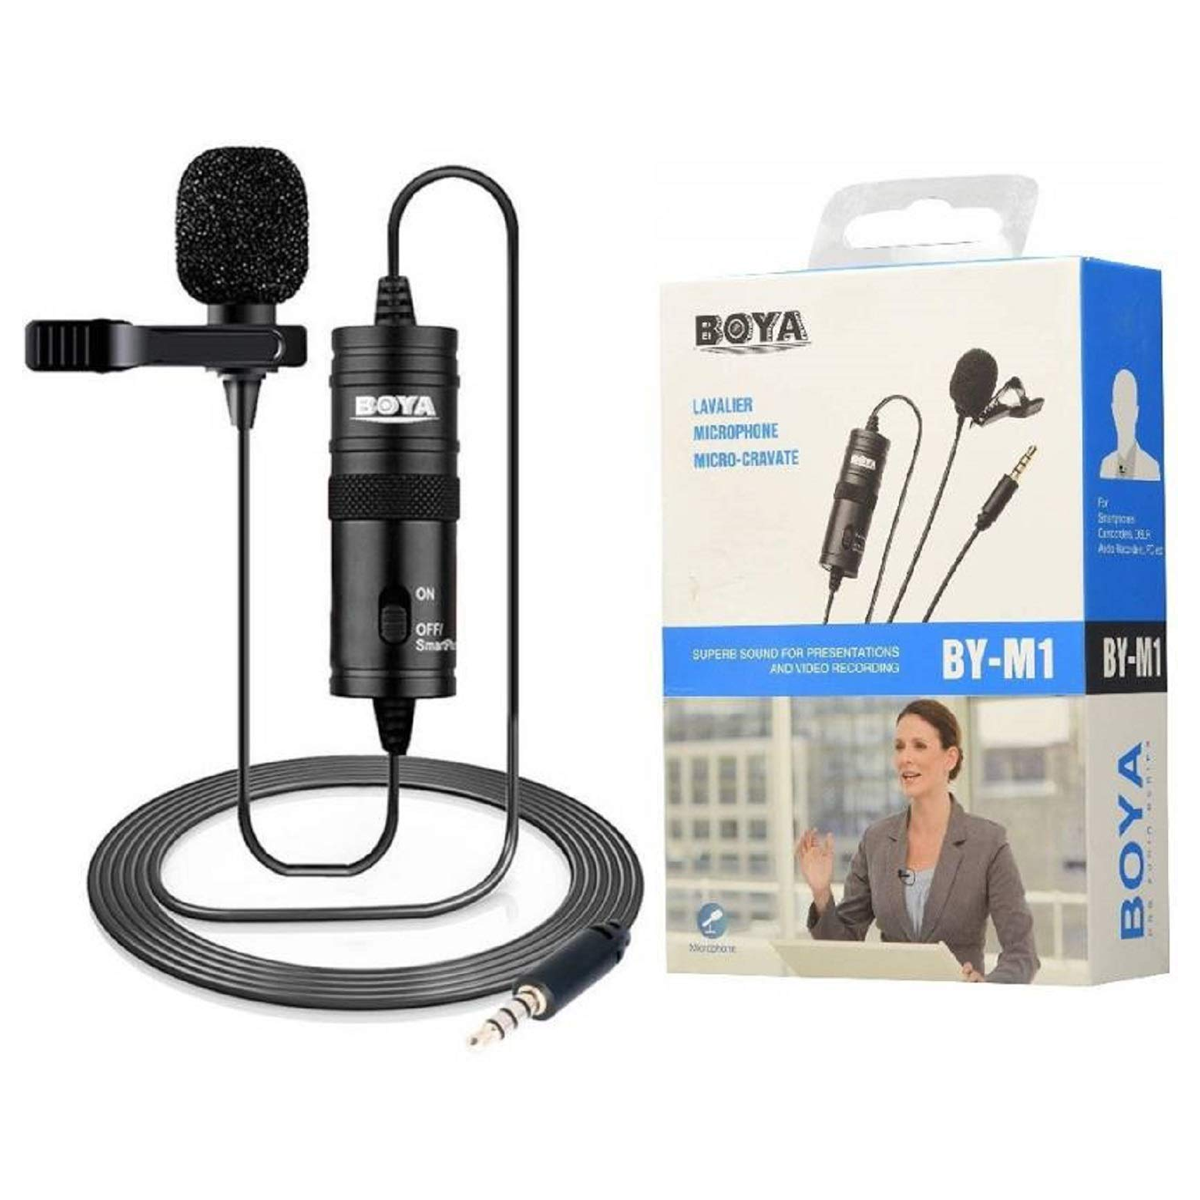 BY-M1 Omnidirectional Lavalier Condenser Recording Microphone - BOYA